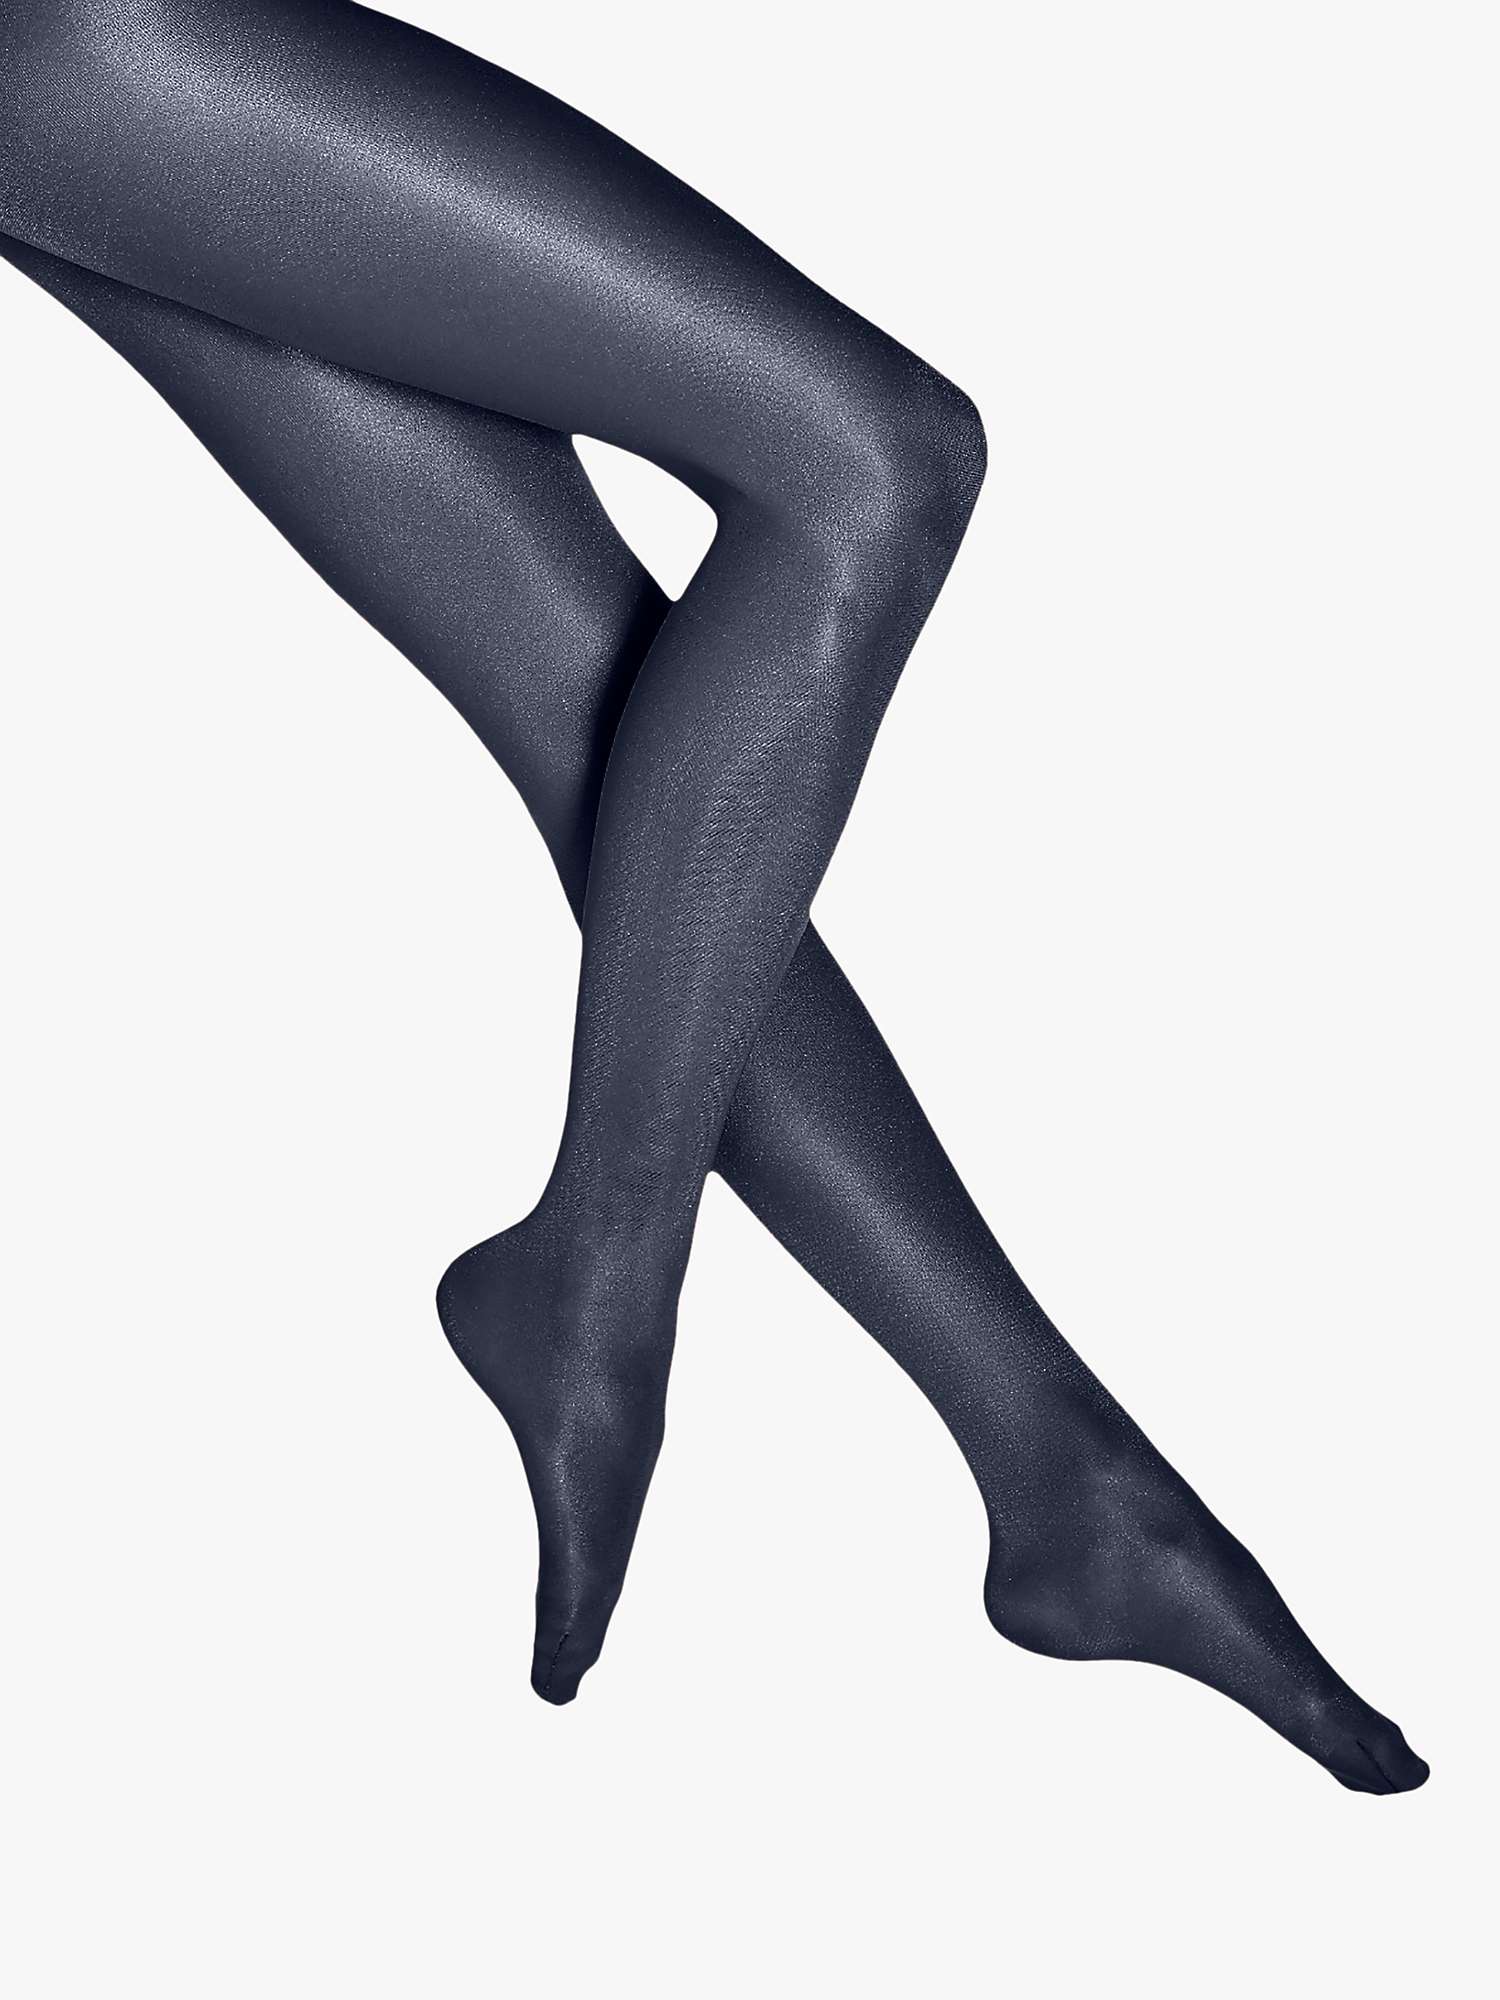 Buy Wolford Neon 40 Semi Sheer Shimmer Tights Online at johnlewis.com